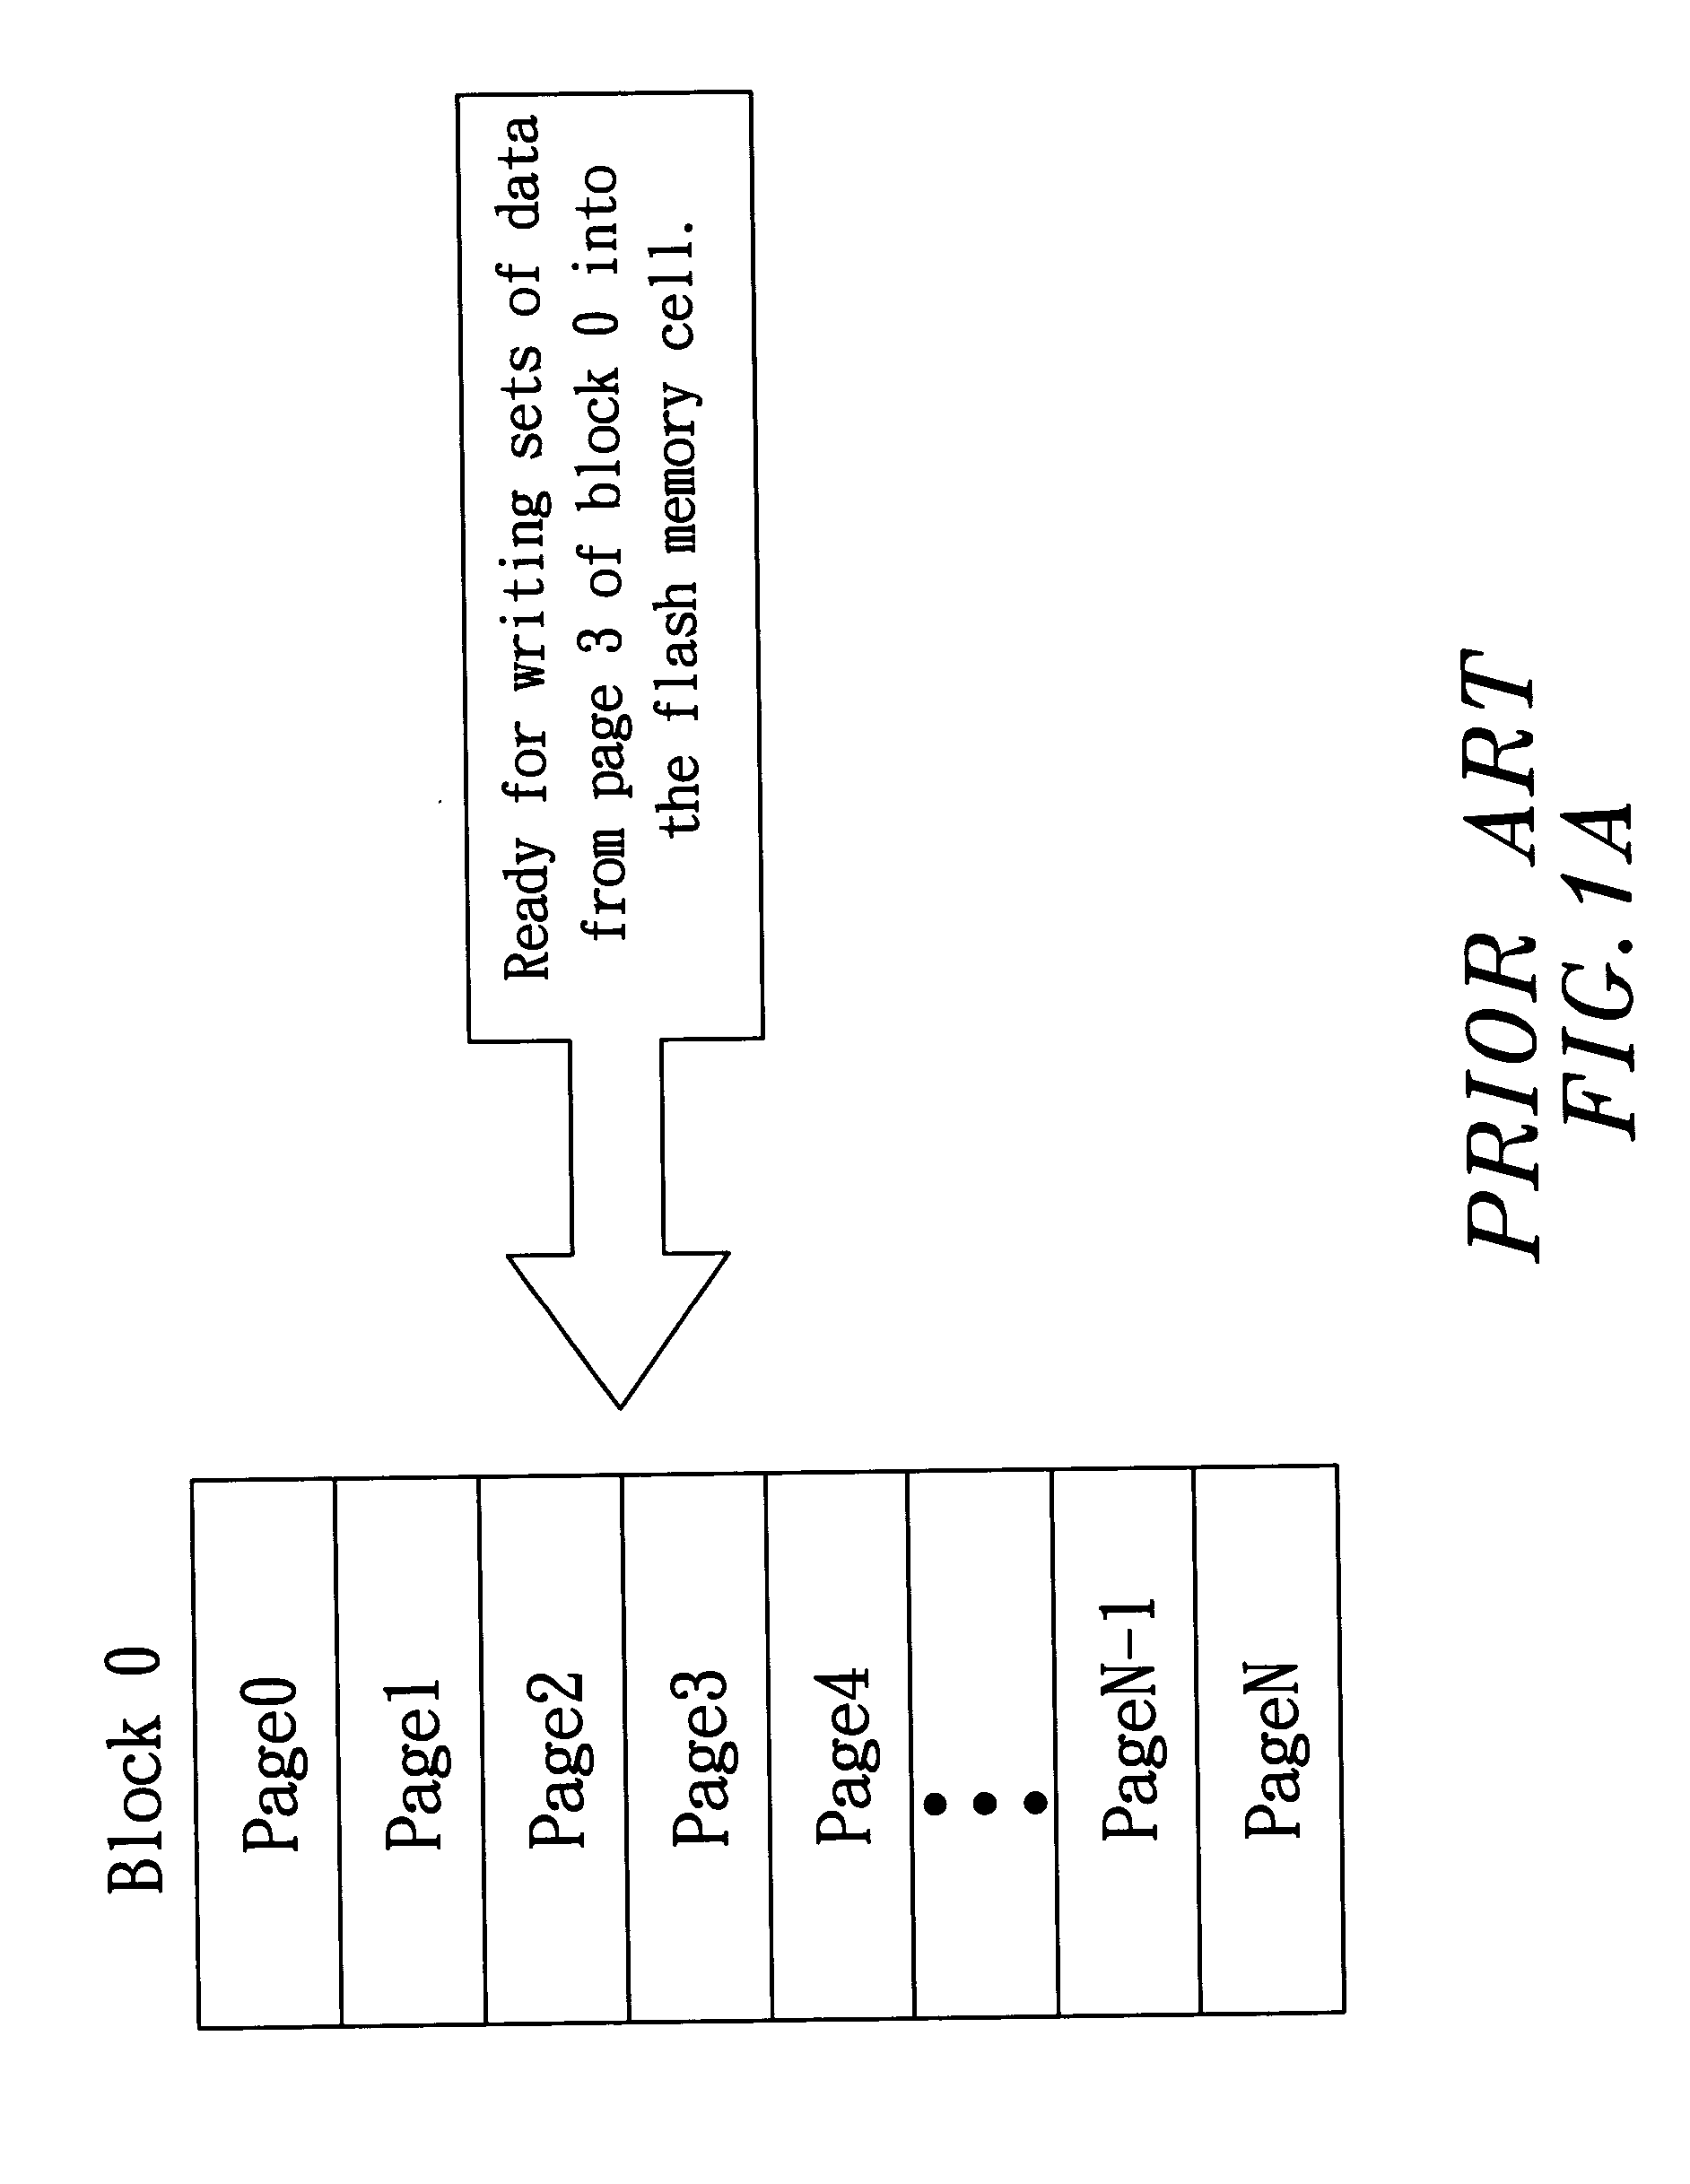 Access and data management method using double parallel tracks for flash memory cells